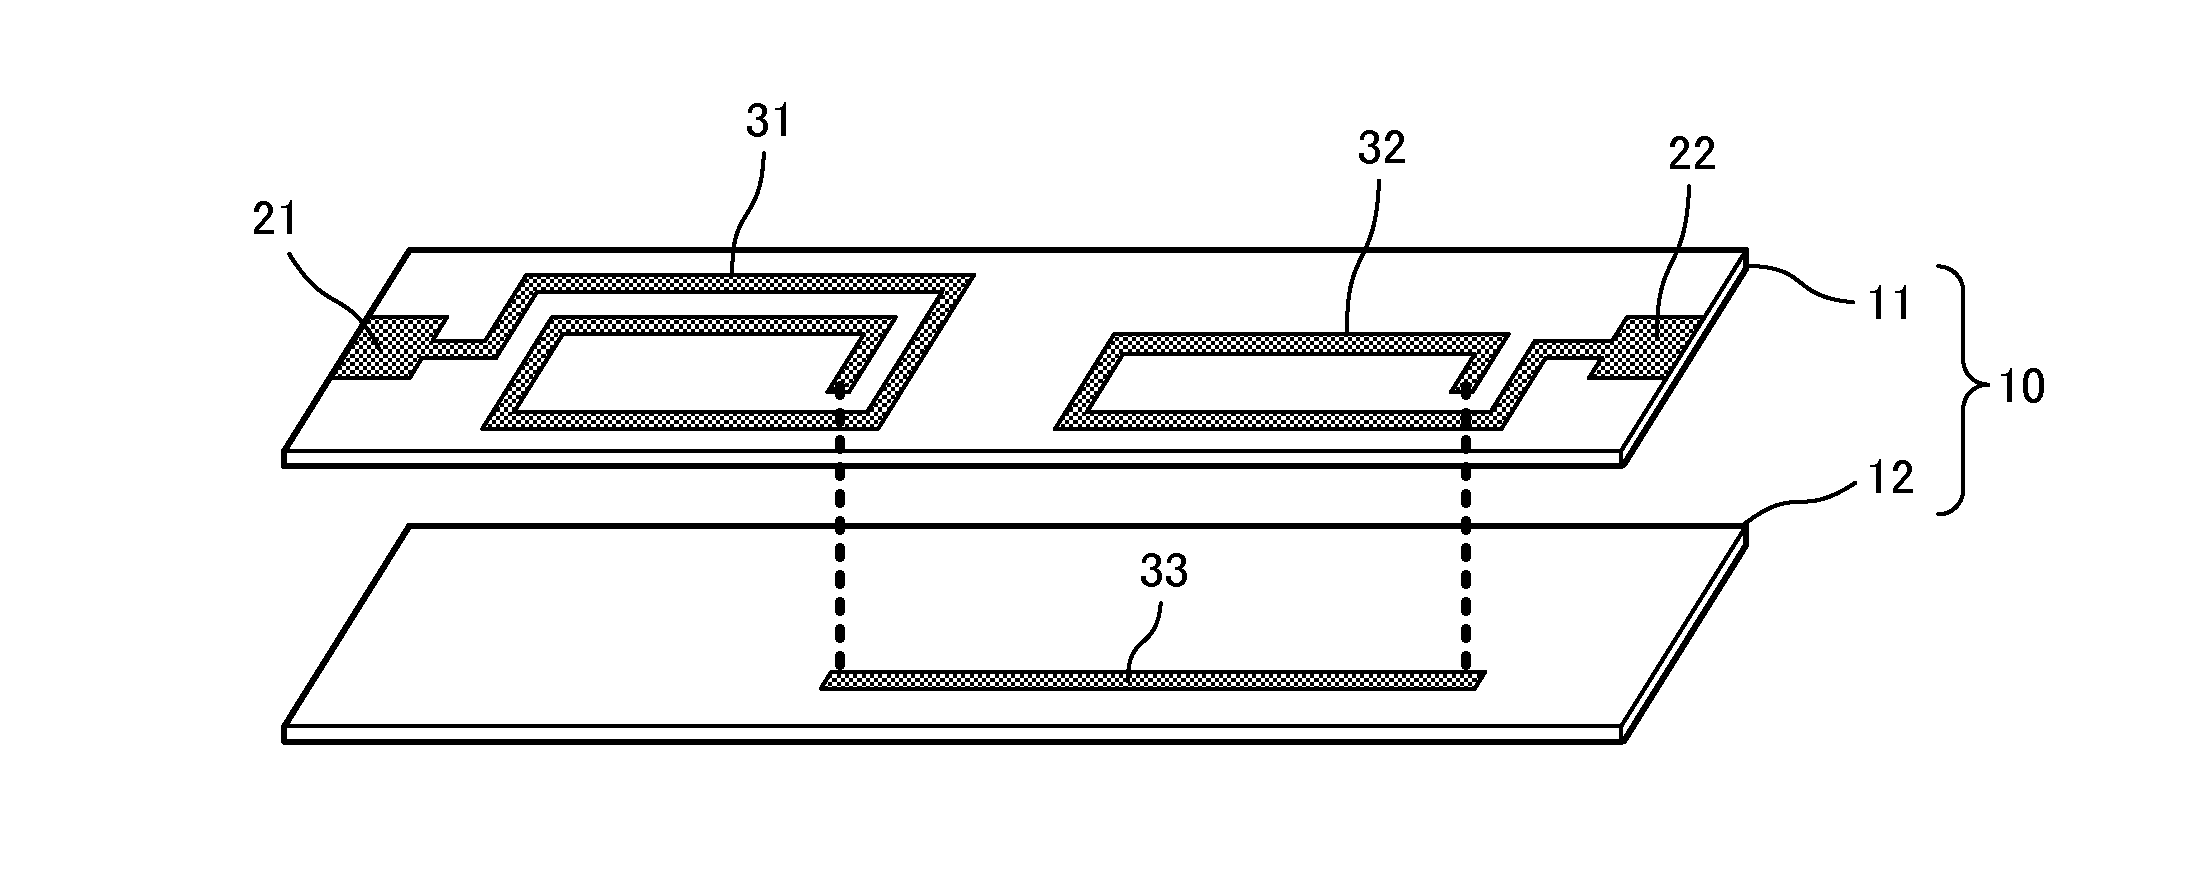 Inductor element, inductor bridge, and high-frequency filter